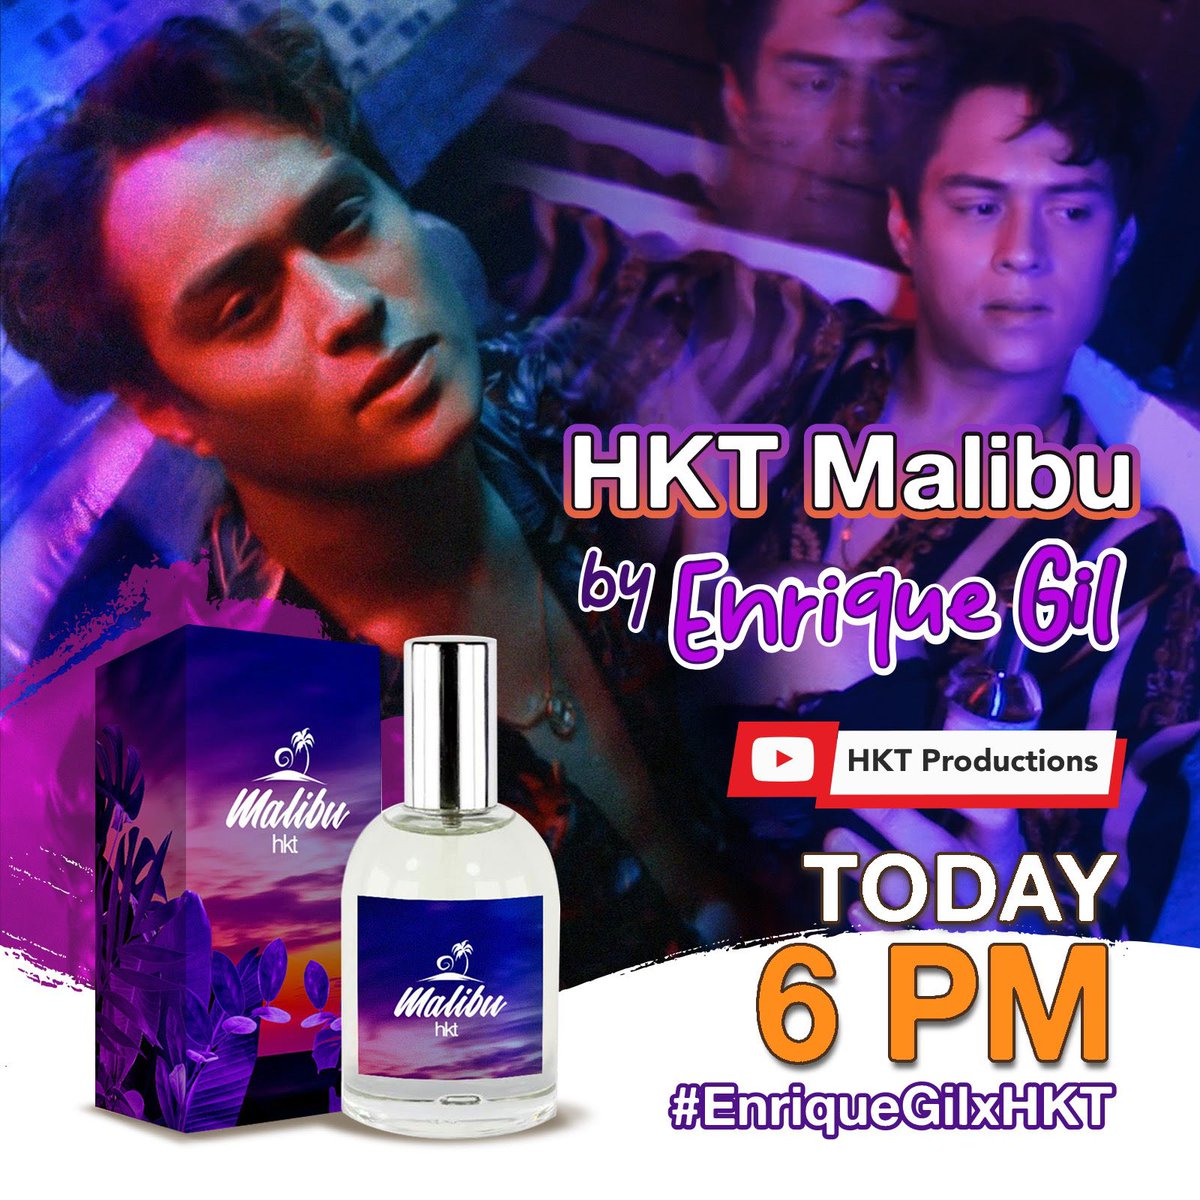 The sky is so blue in Malibu! 💙

HKT will bring the sounds of the waves crashing and the ocean right at your doorstep. Join the #MalibuParty tonight!

⏰ Monday, July 6 at 6pm
Youtube: HKT Productions

#HKTMalibu
#EnriqueGilxHKT
#EnriqueGil